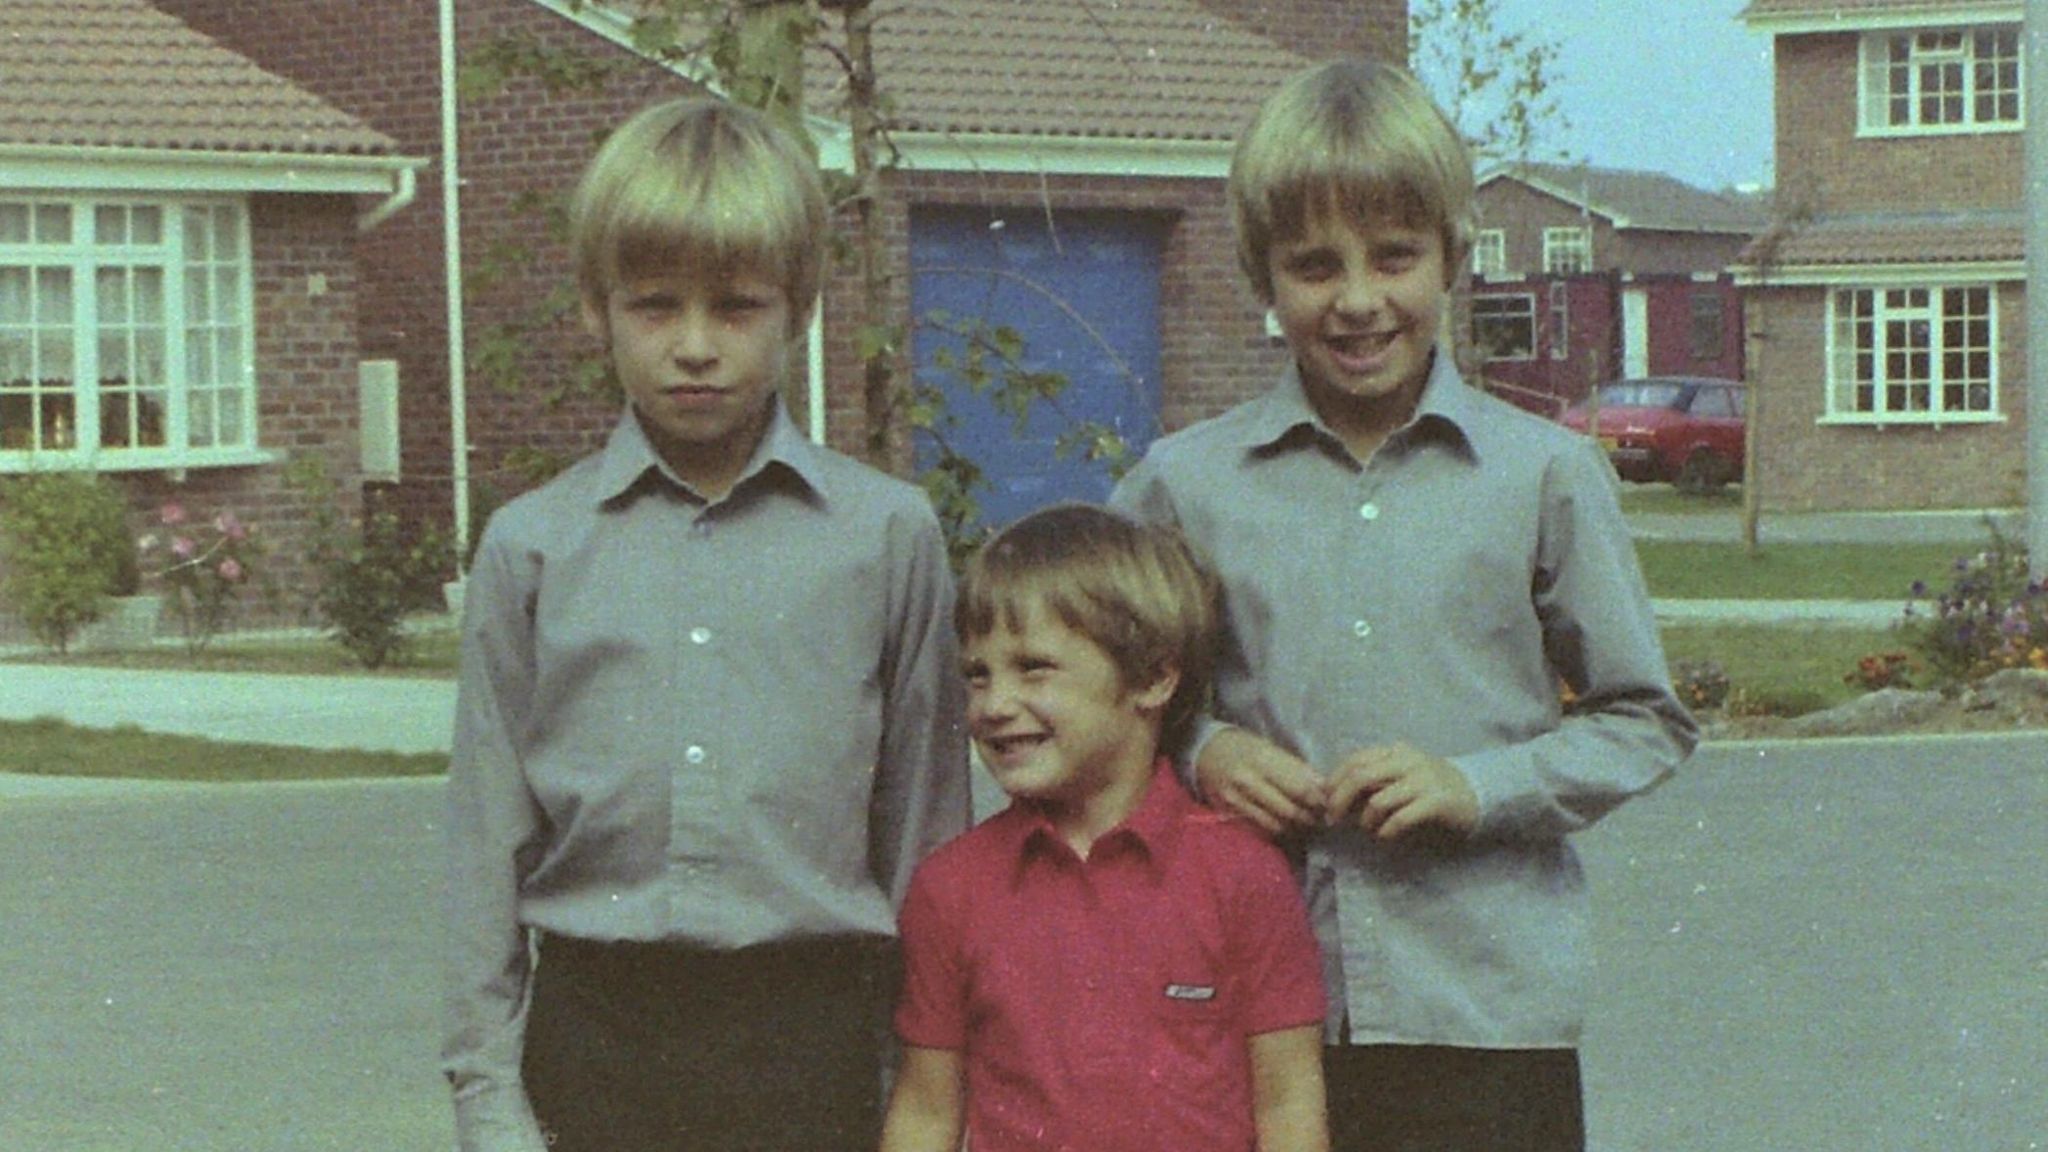 Steve Wyatt with his older twin brothers Rob and Mike smiling to camera. Circa 1980